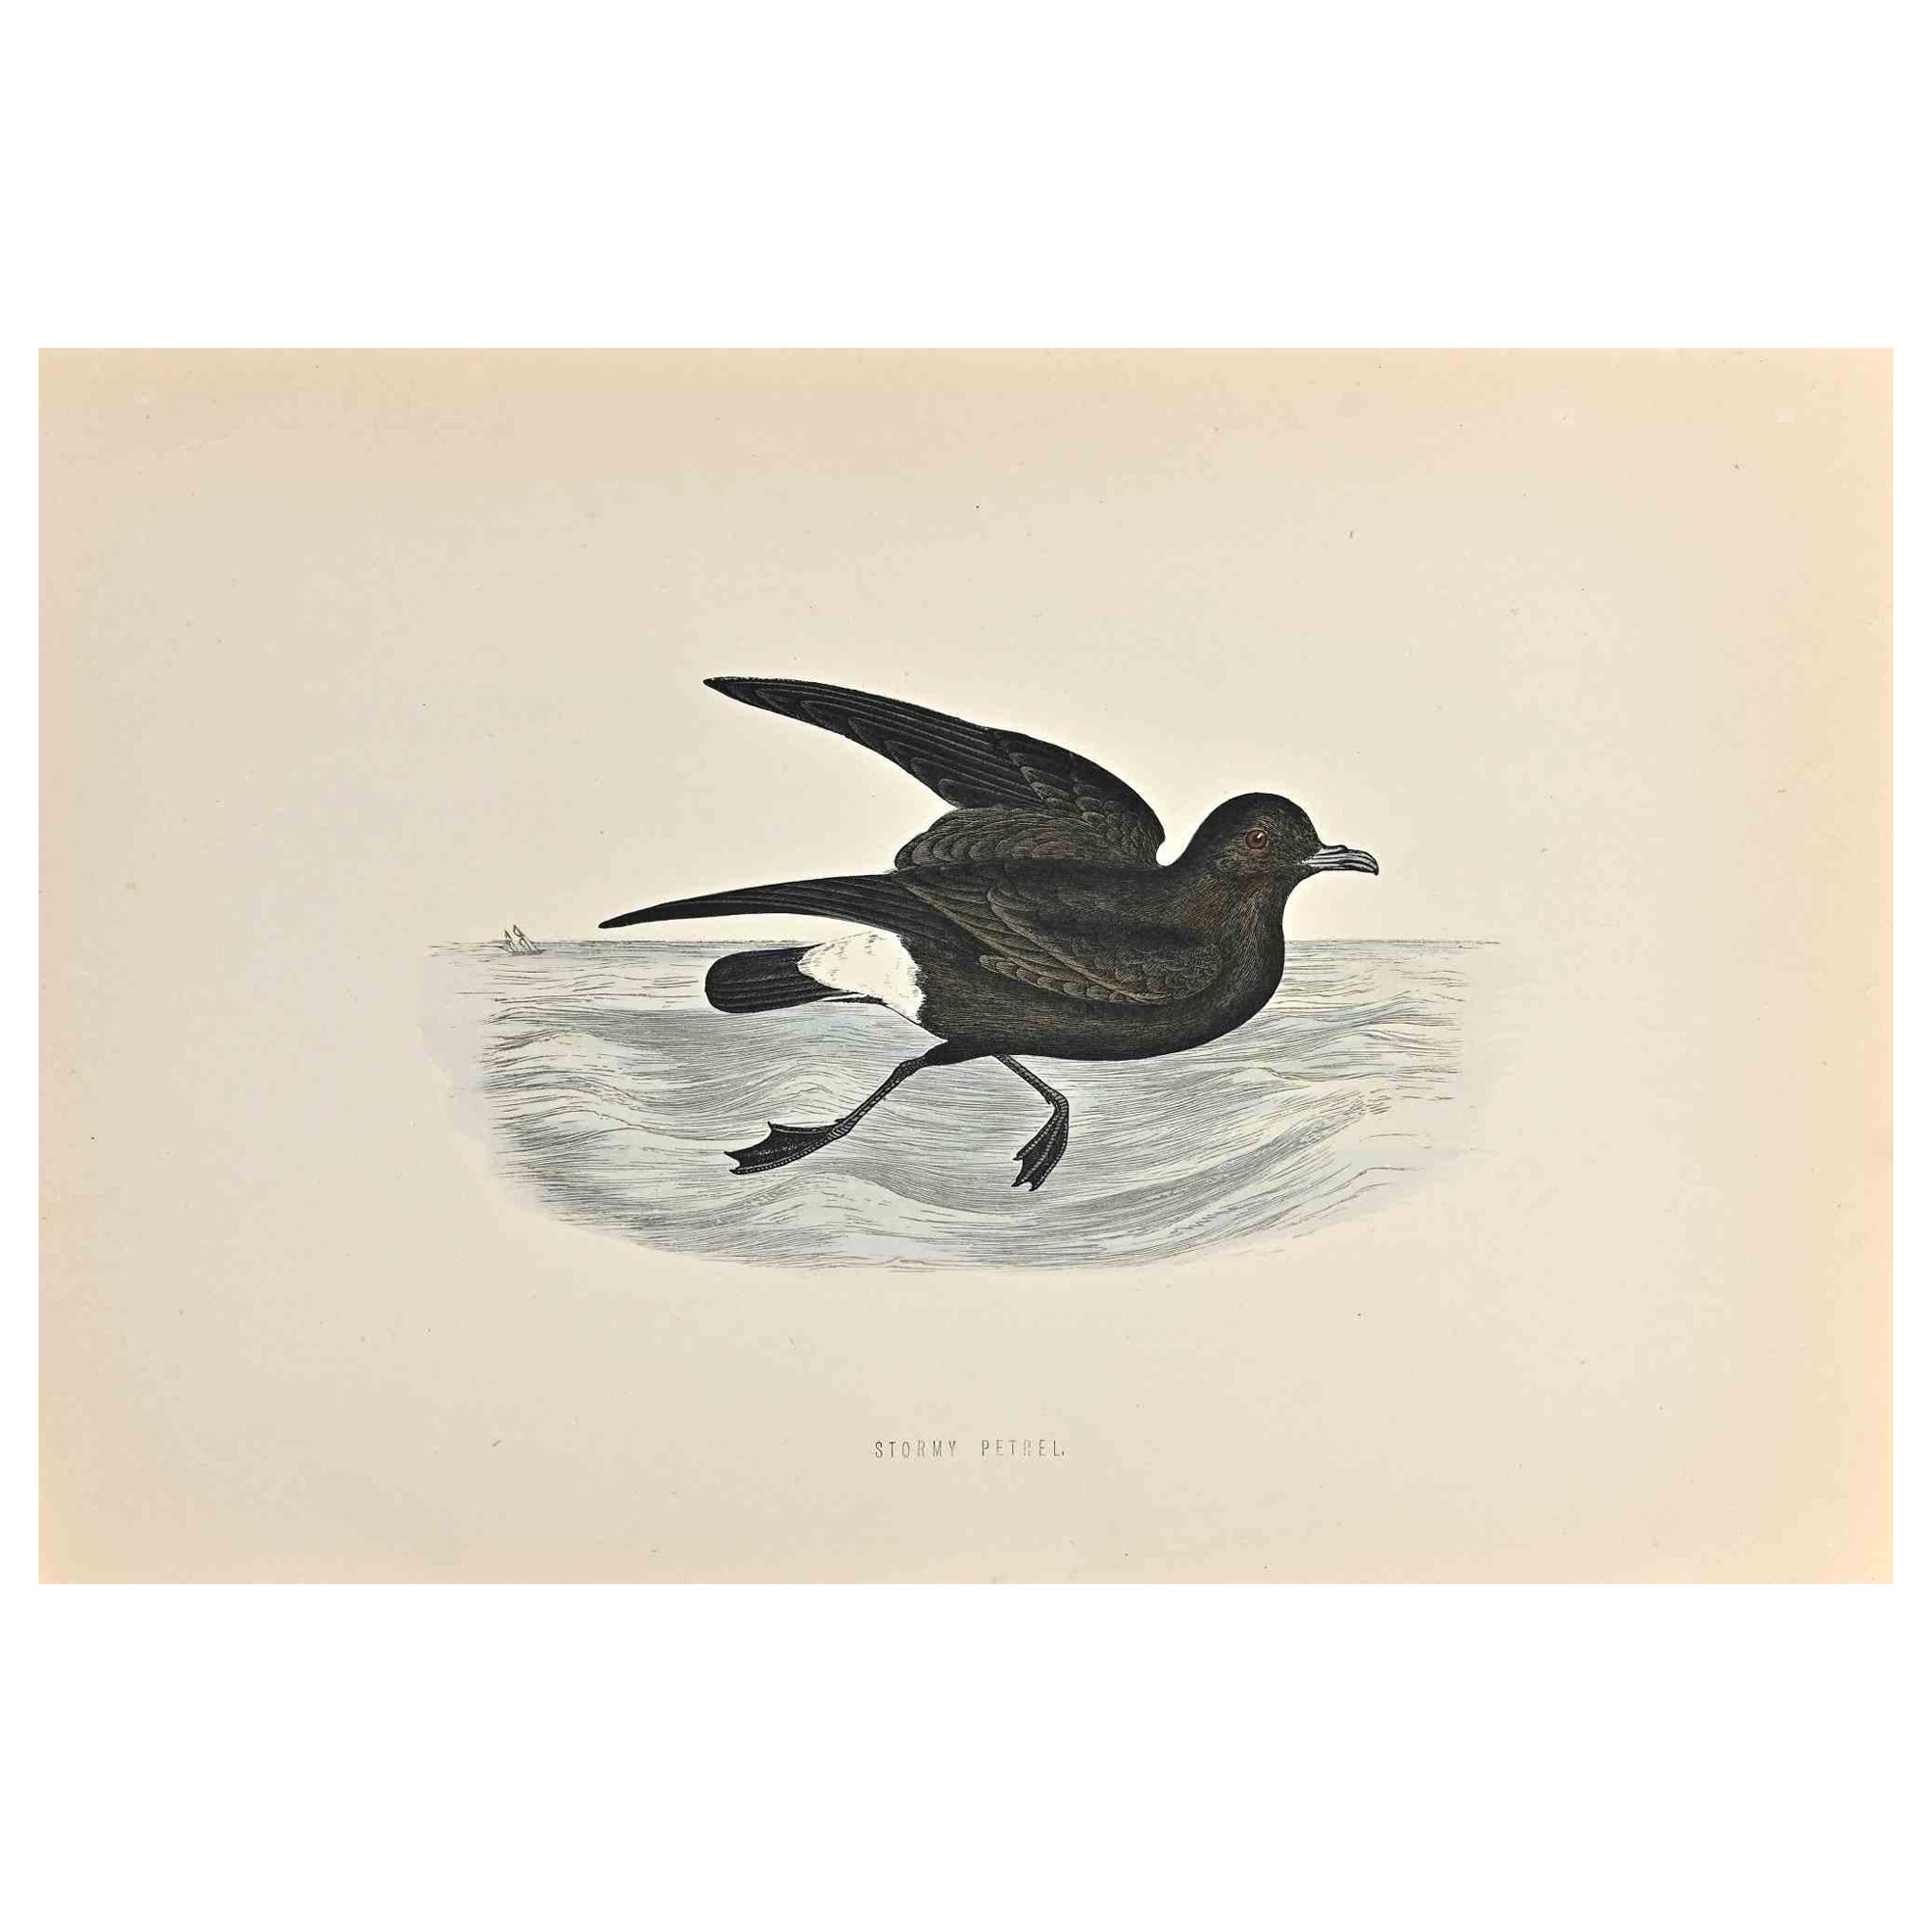 Stormy Petrel is a modern artwork realized in 1870 by the British artist Alexander Francis Lydon (1836-1917) . 

Woodcut print, hand colored, published by London, Bell & Sons, 1870.  Name of the bird printed in plate. This work is part of a print